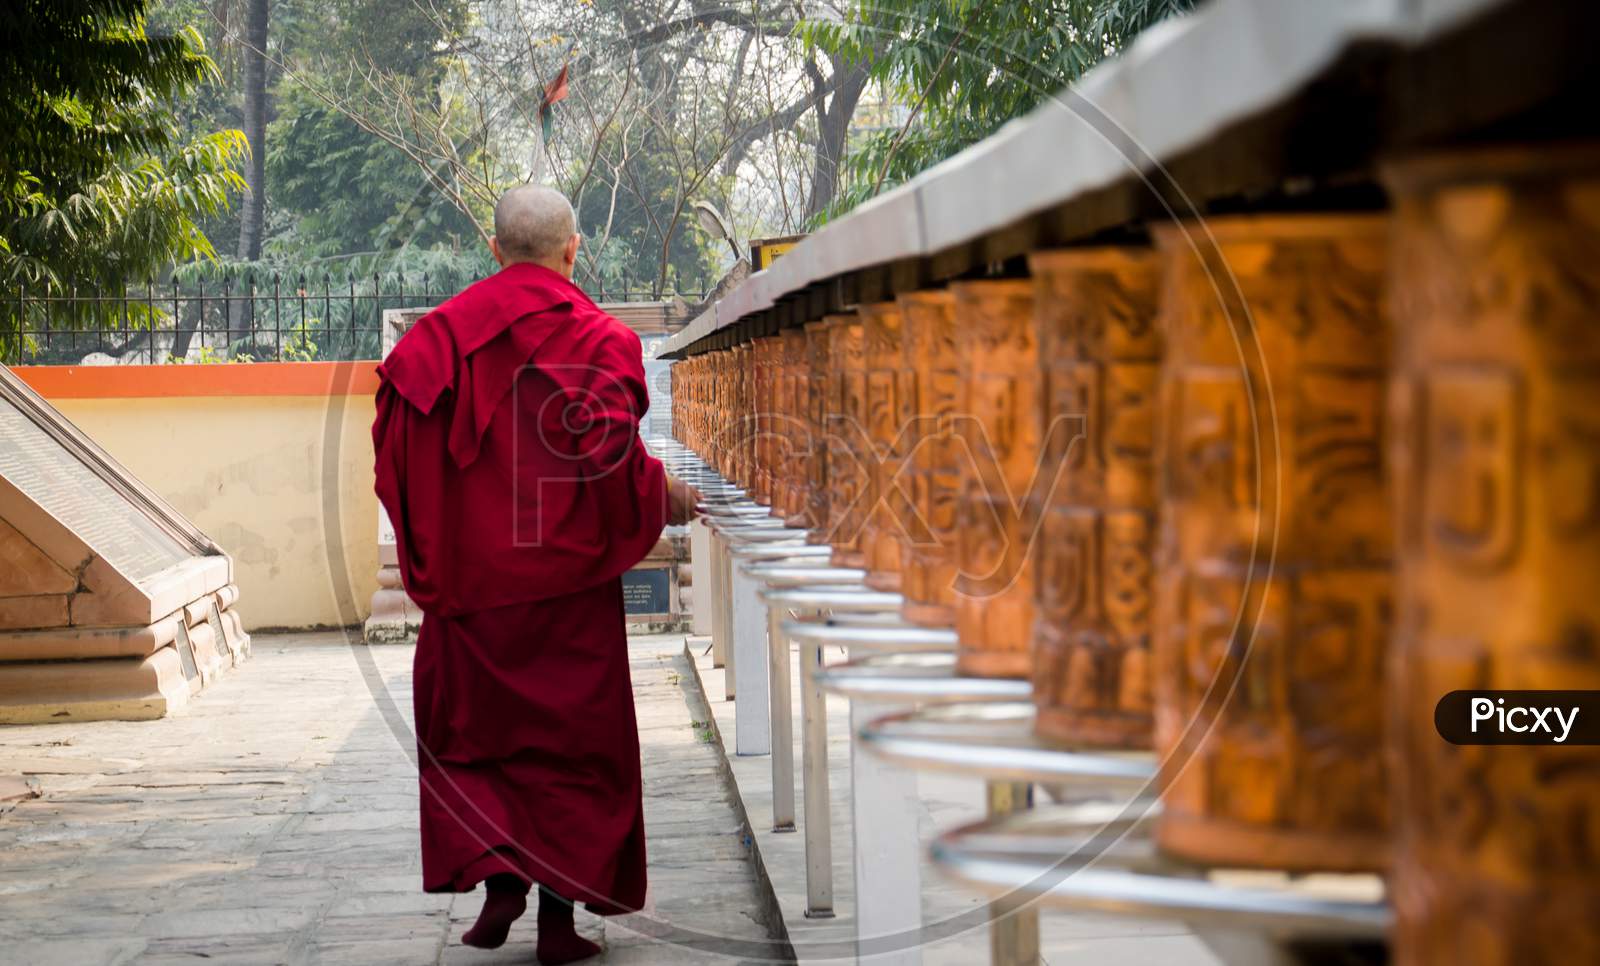 A Monk With Prayer Wheels In A Bhuddisht Temple